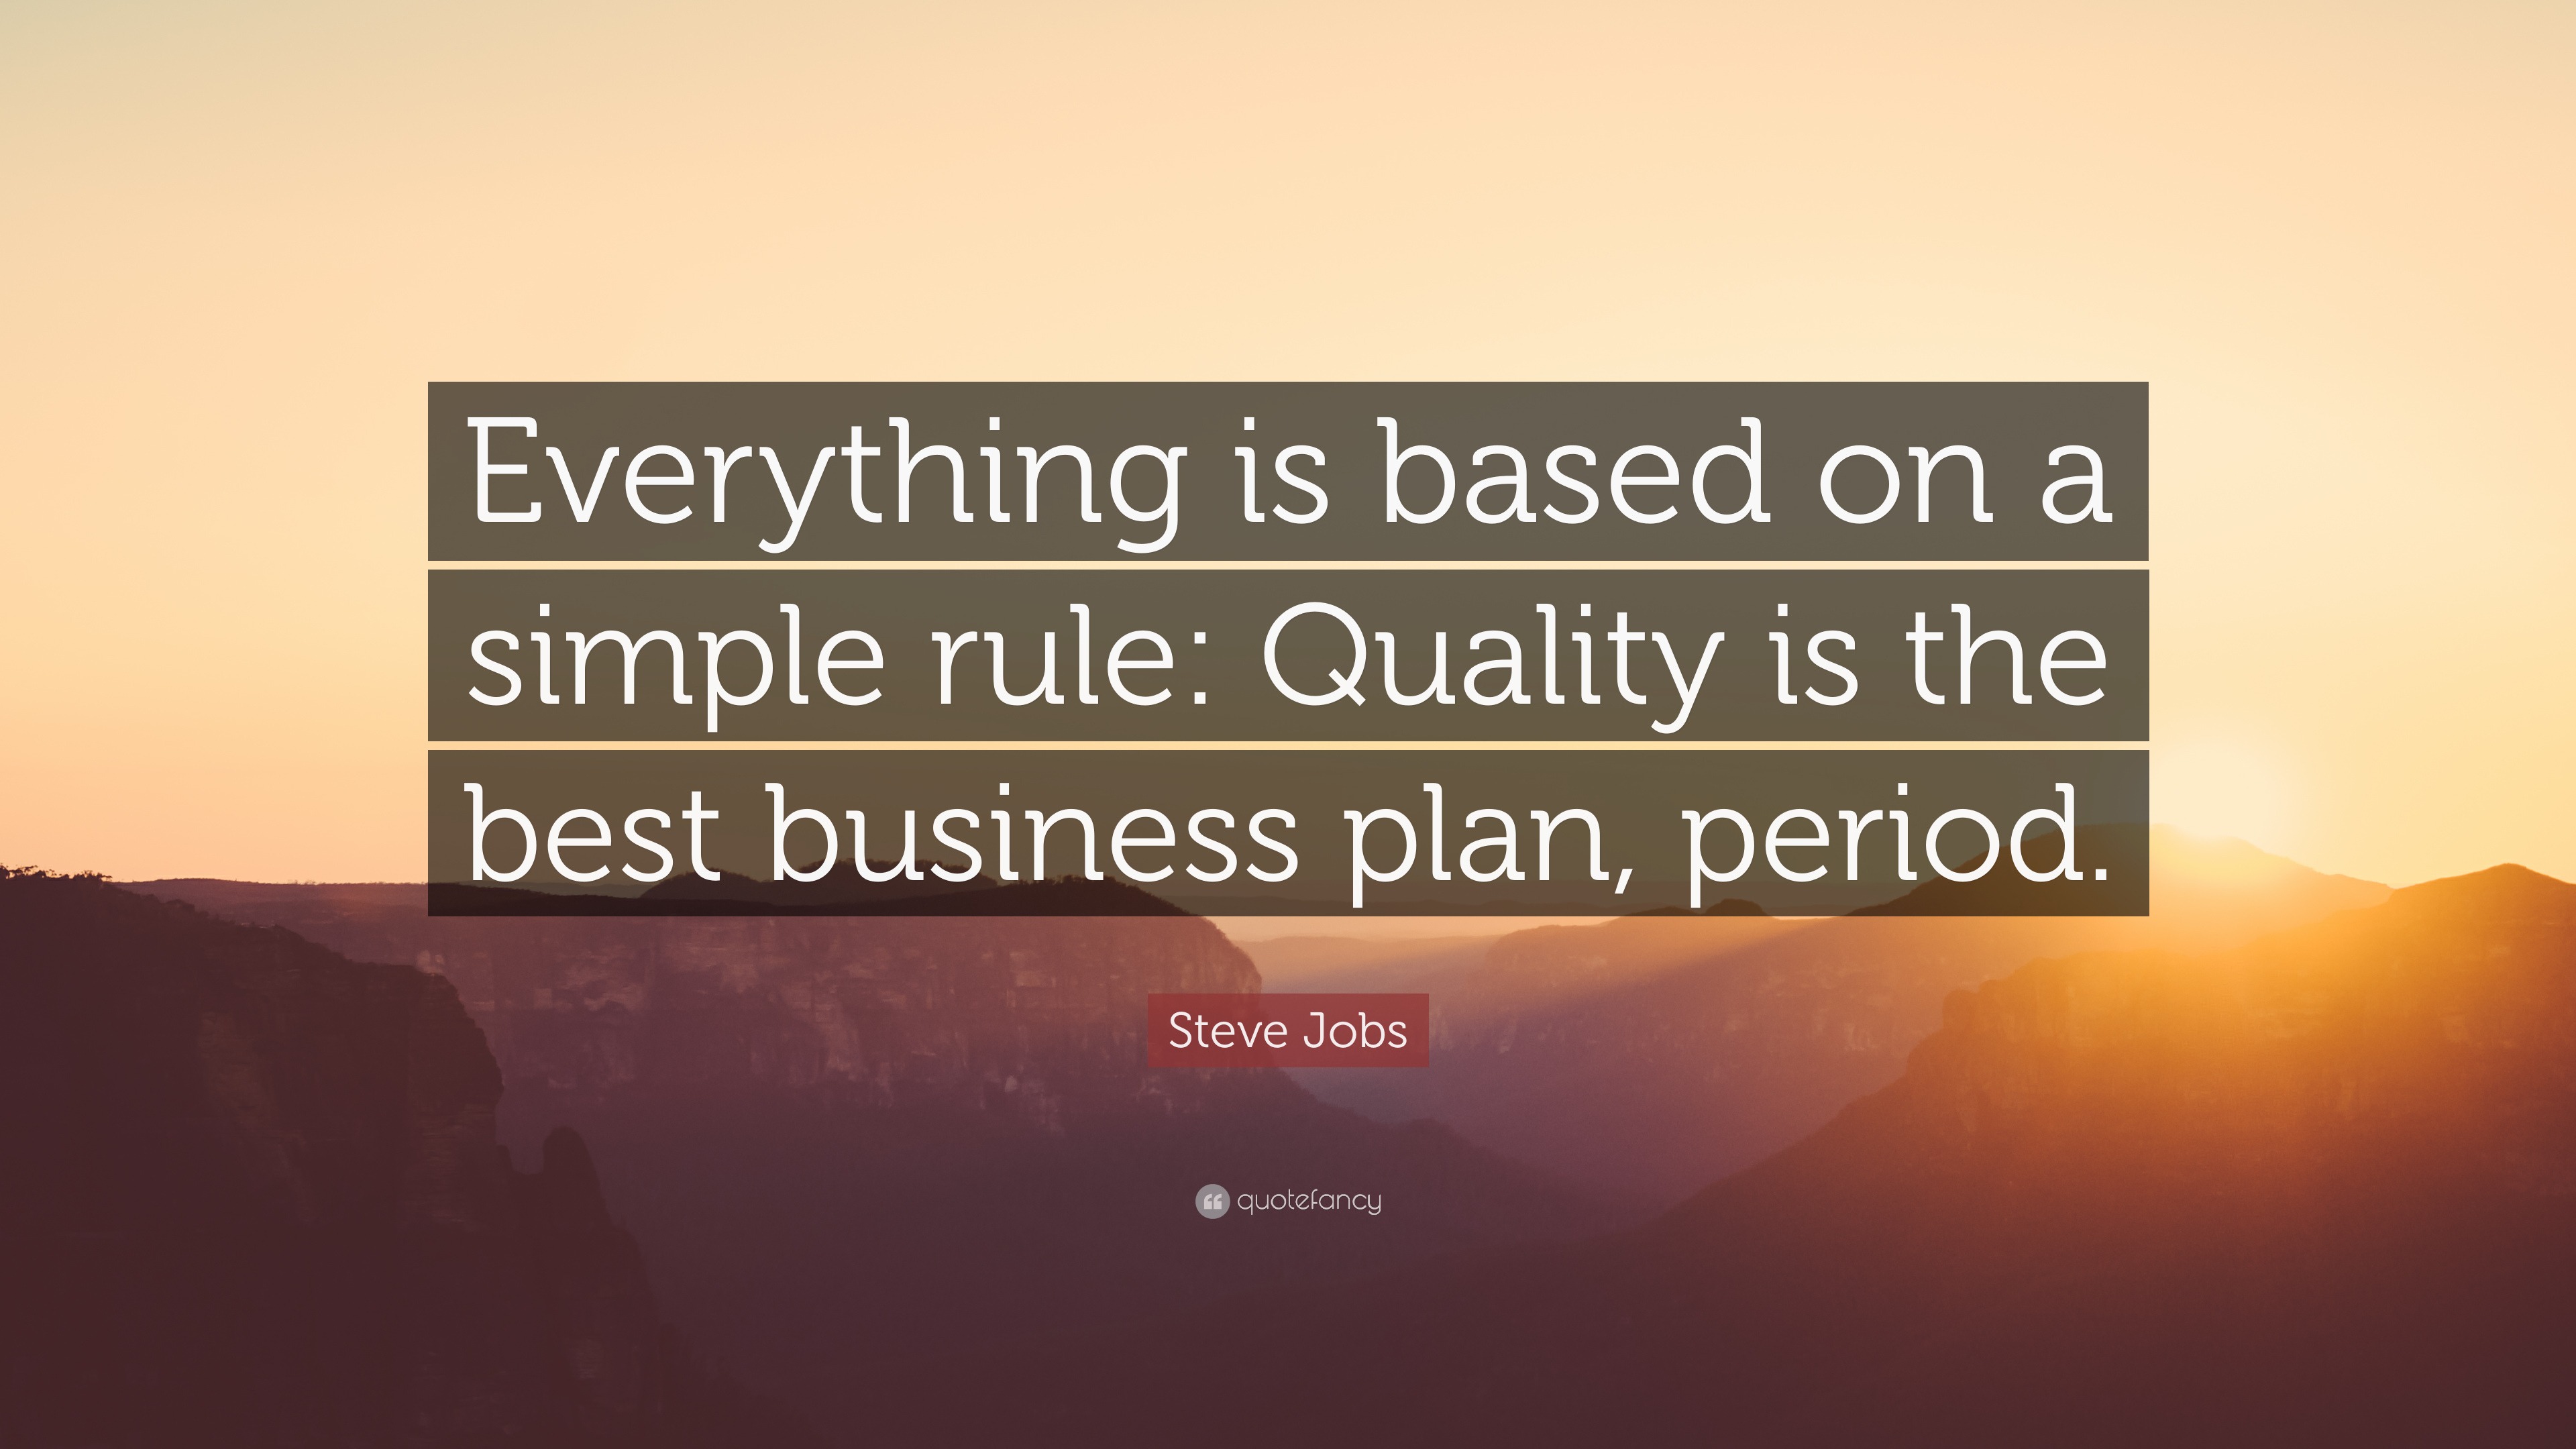 quality is the best business plan period